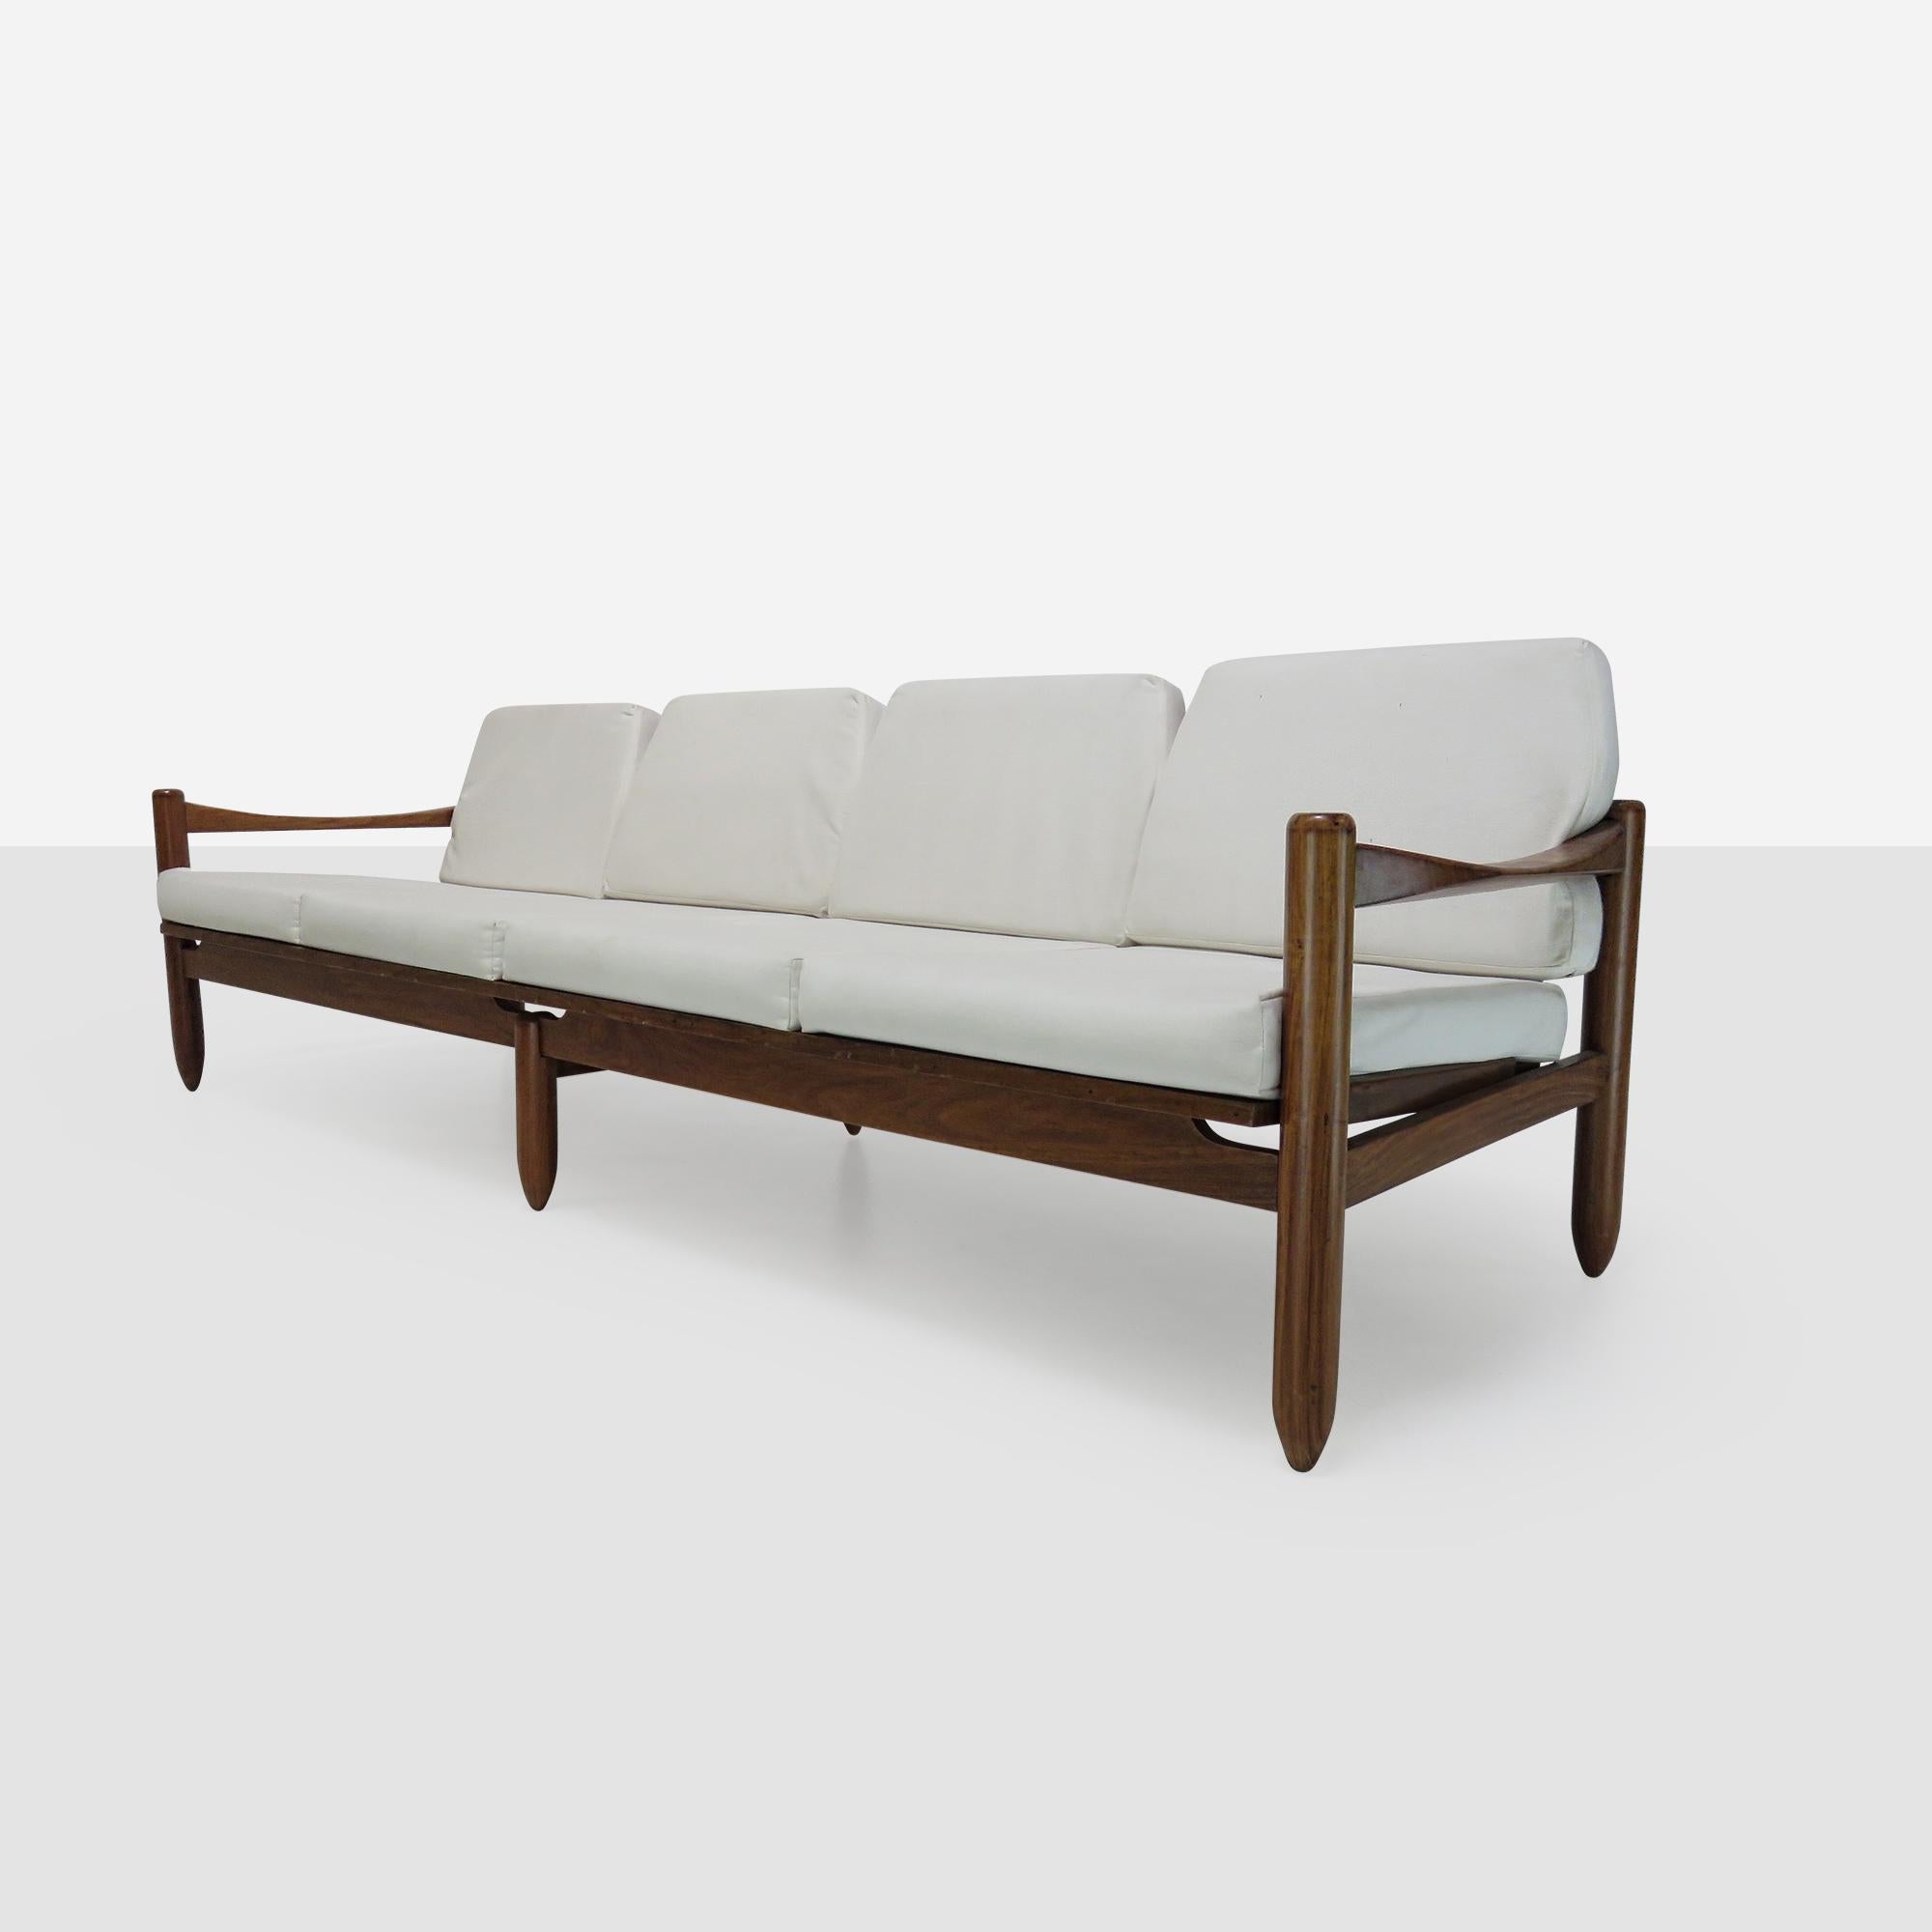 A Brazilian hardwood sofa. Attractive slatted back, cyclindrical legs and curved arms. Cushions not included.

We have matching side chairs, coffee and side table.